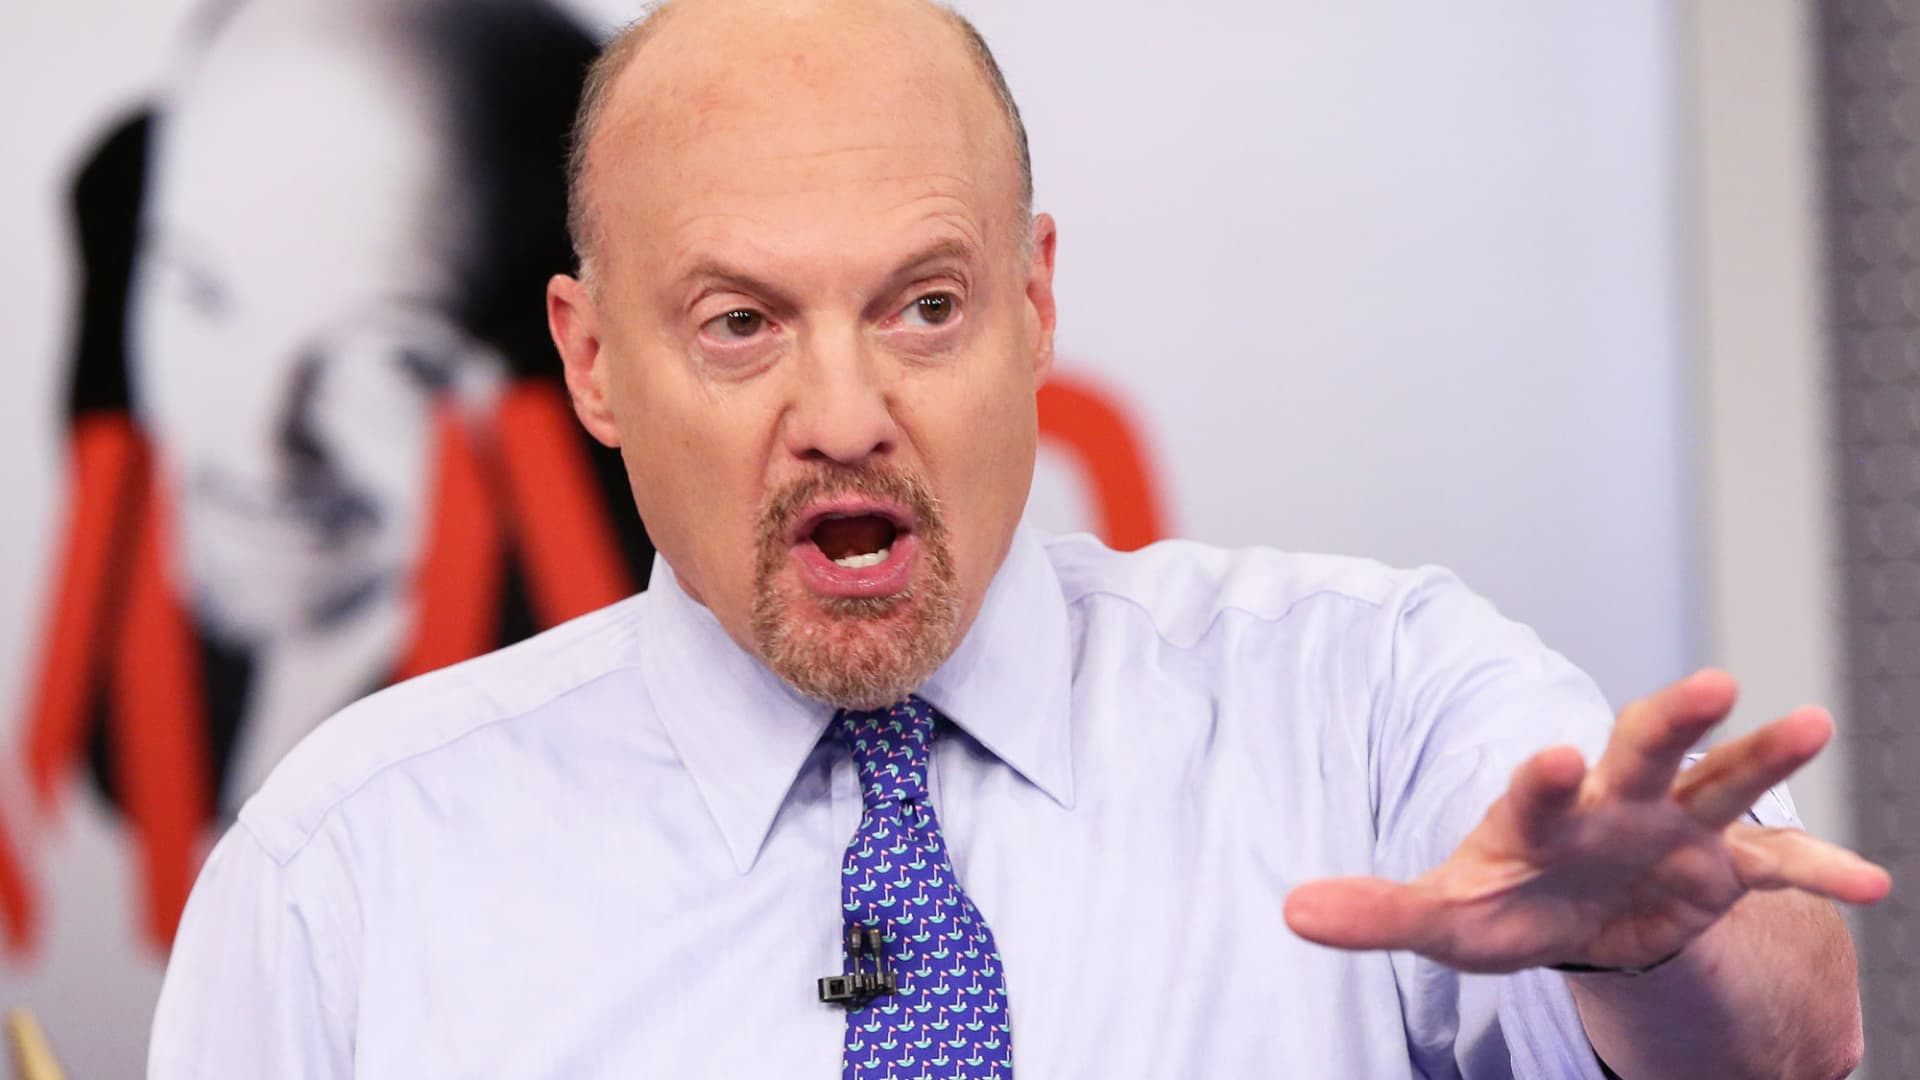 Expect a rally Wednesday if there’s good news from retail giants and China, Jim Cramer says